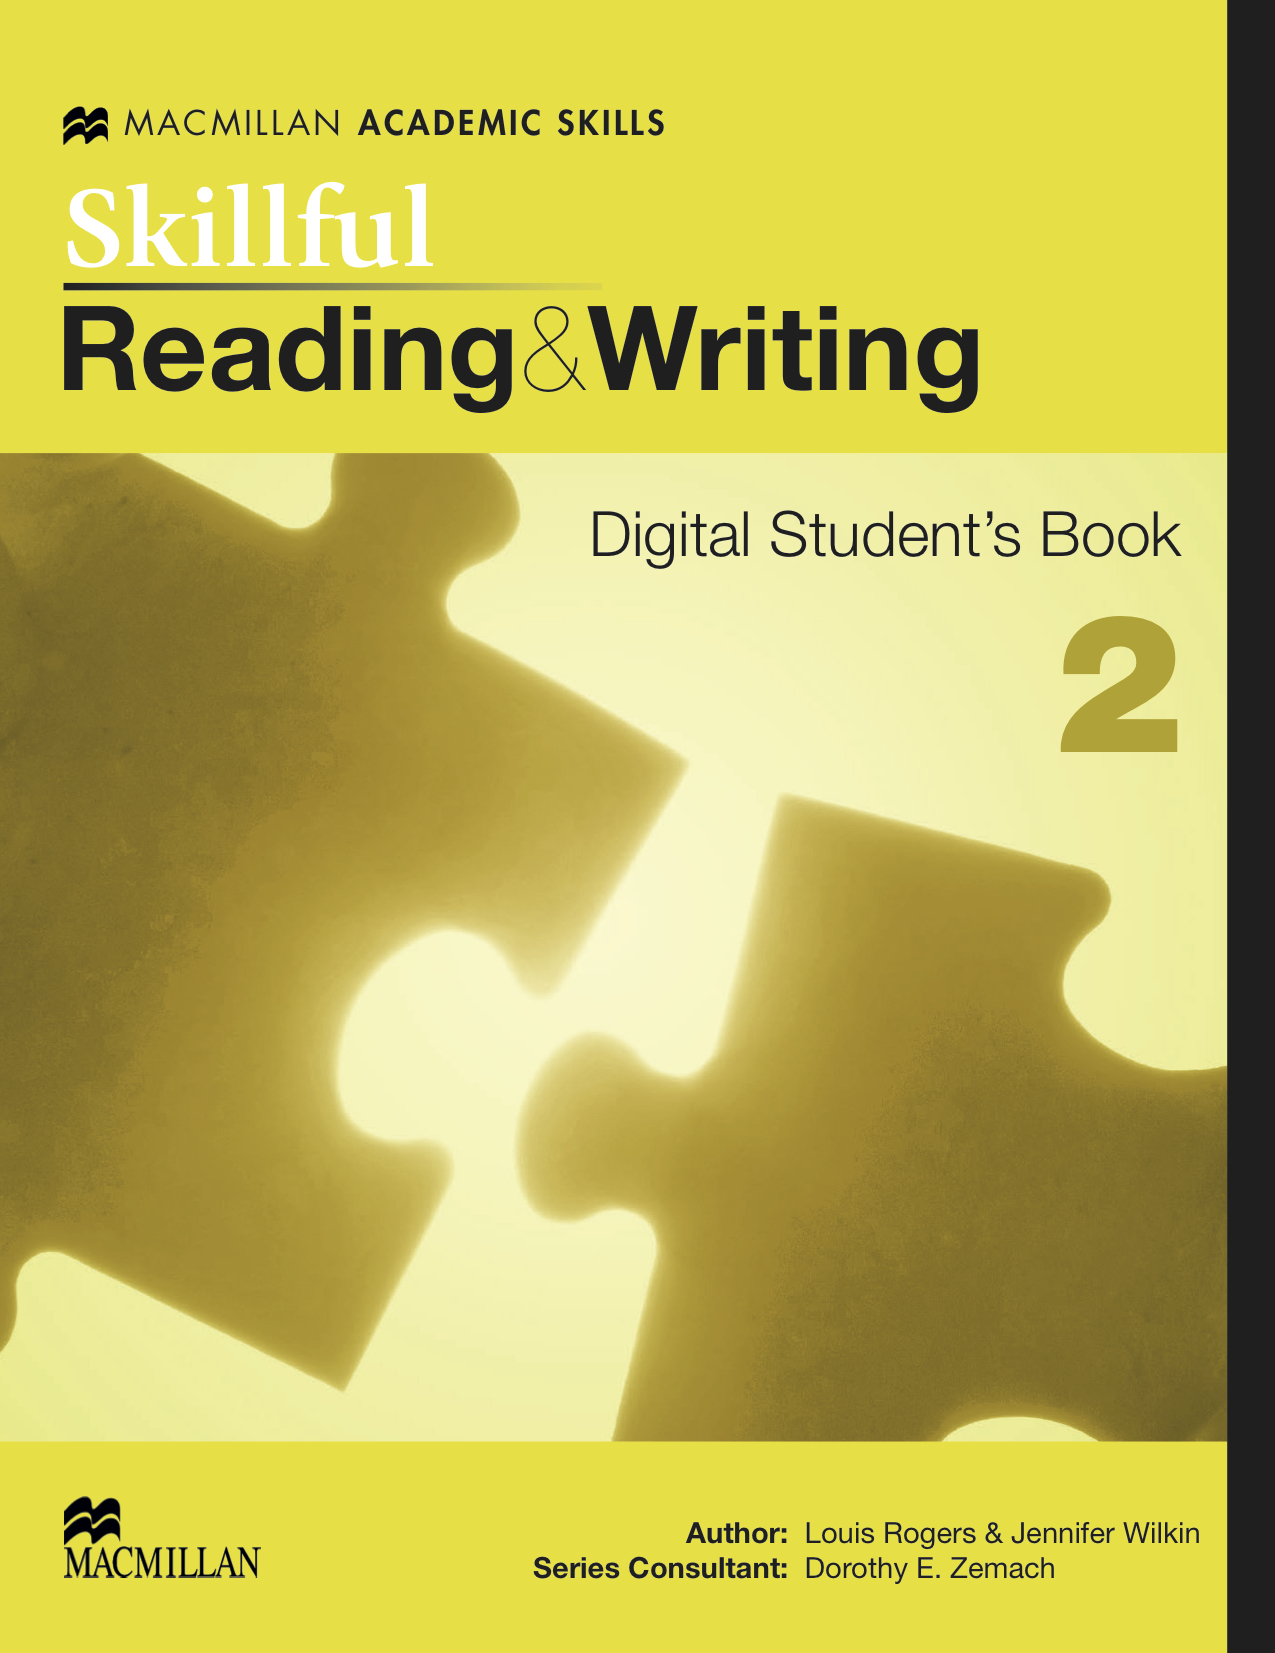 teachreadingwriting3-10-reading-activities-for-k-2-guided-lessons